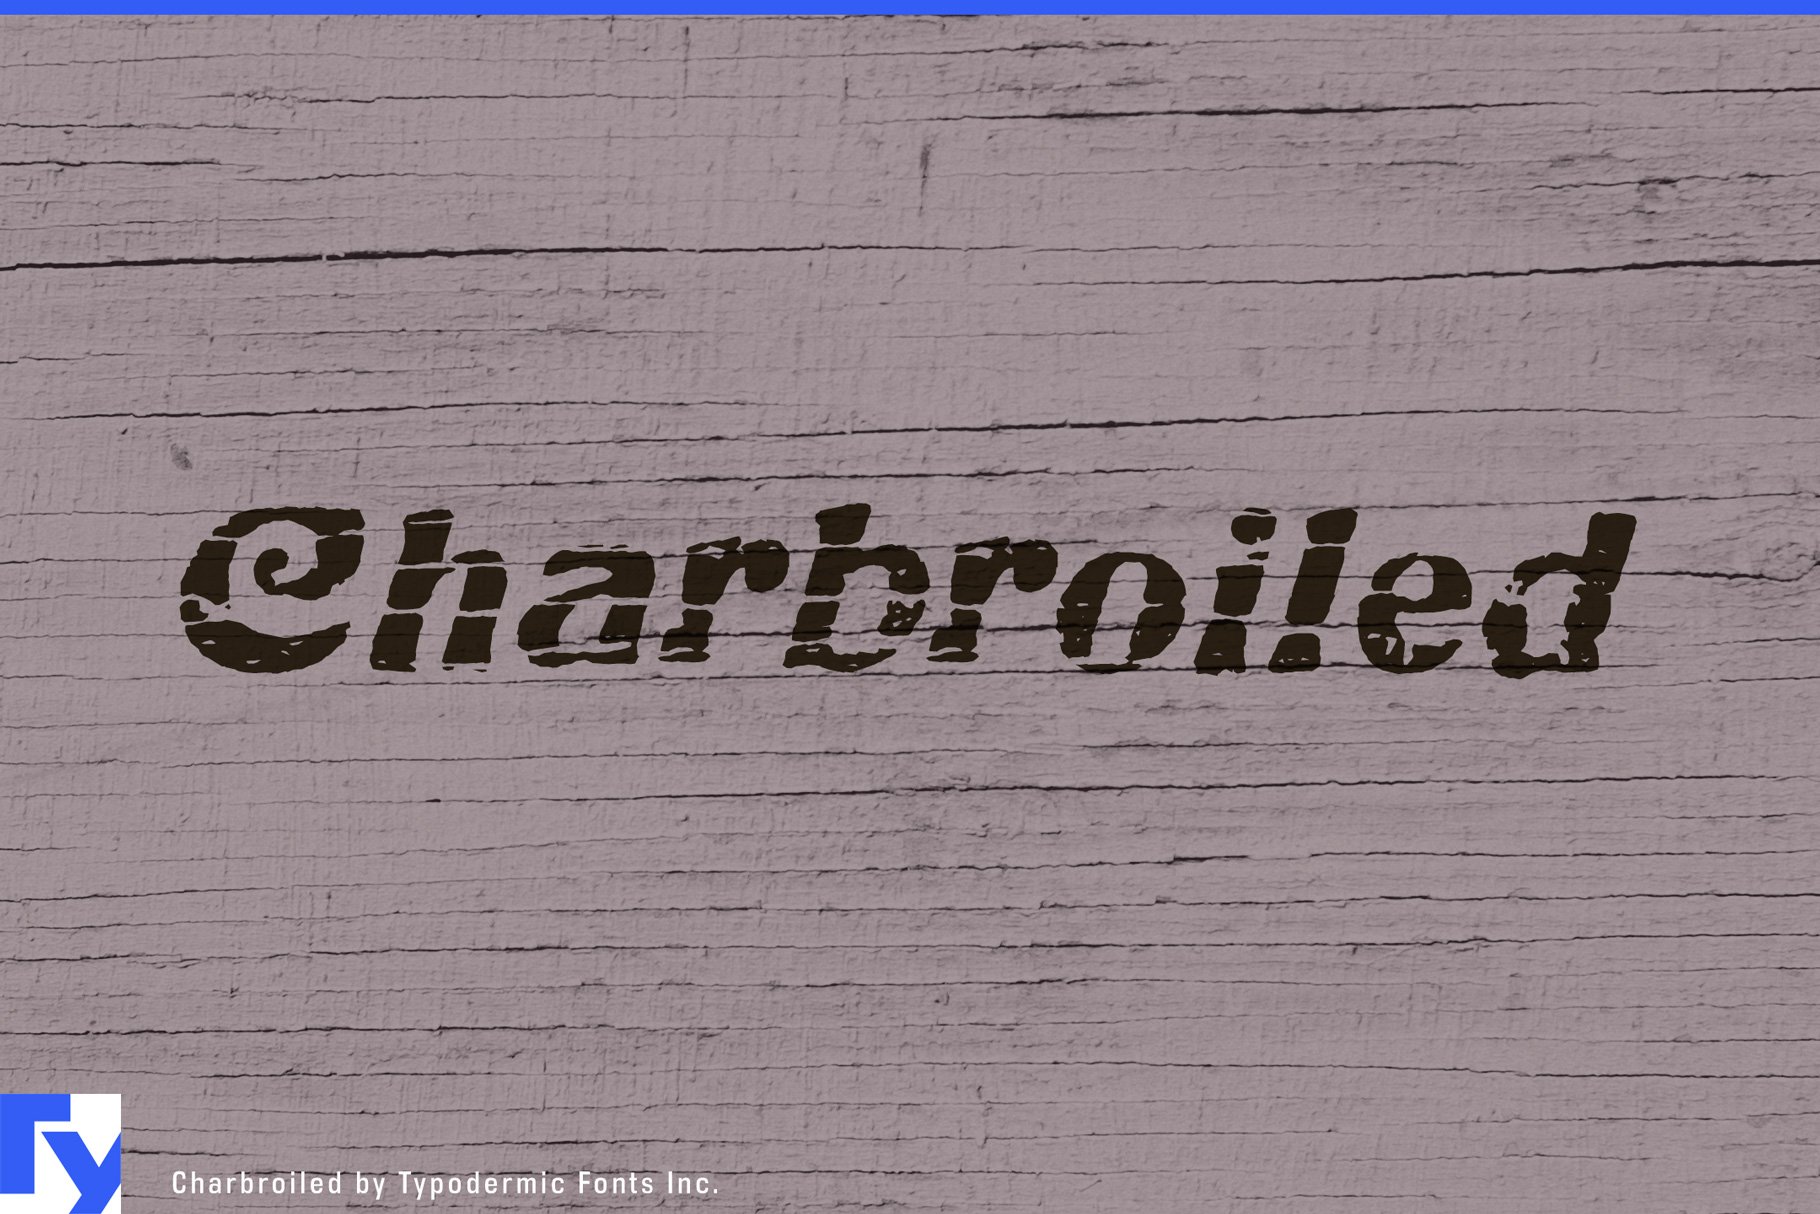 Charbroiled cover image.